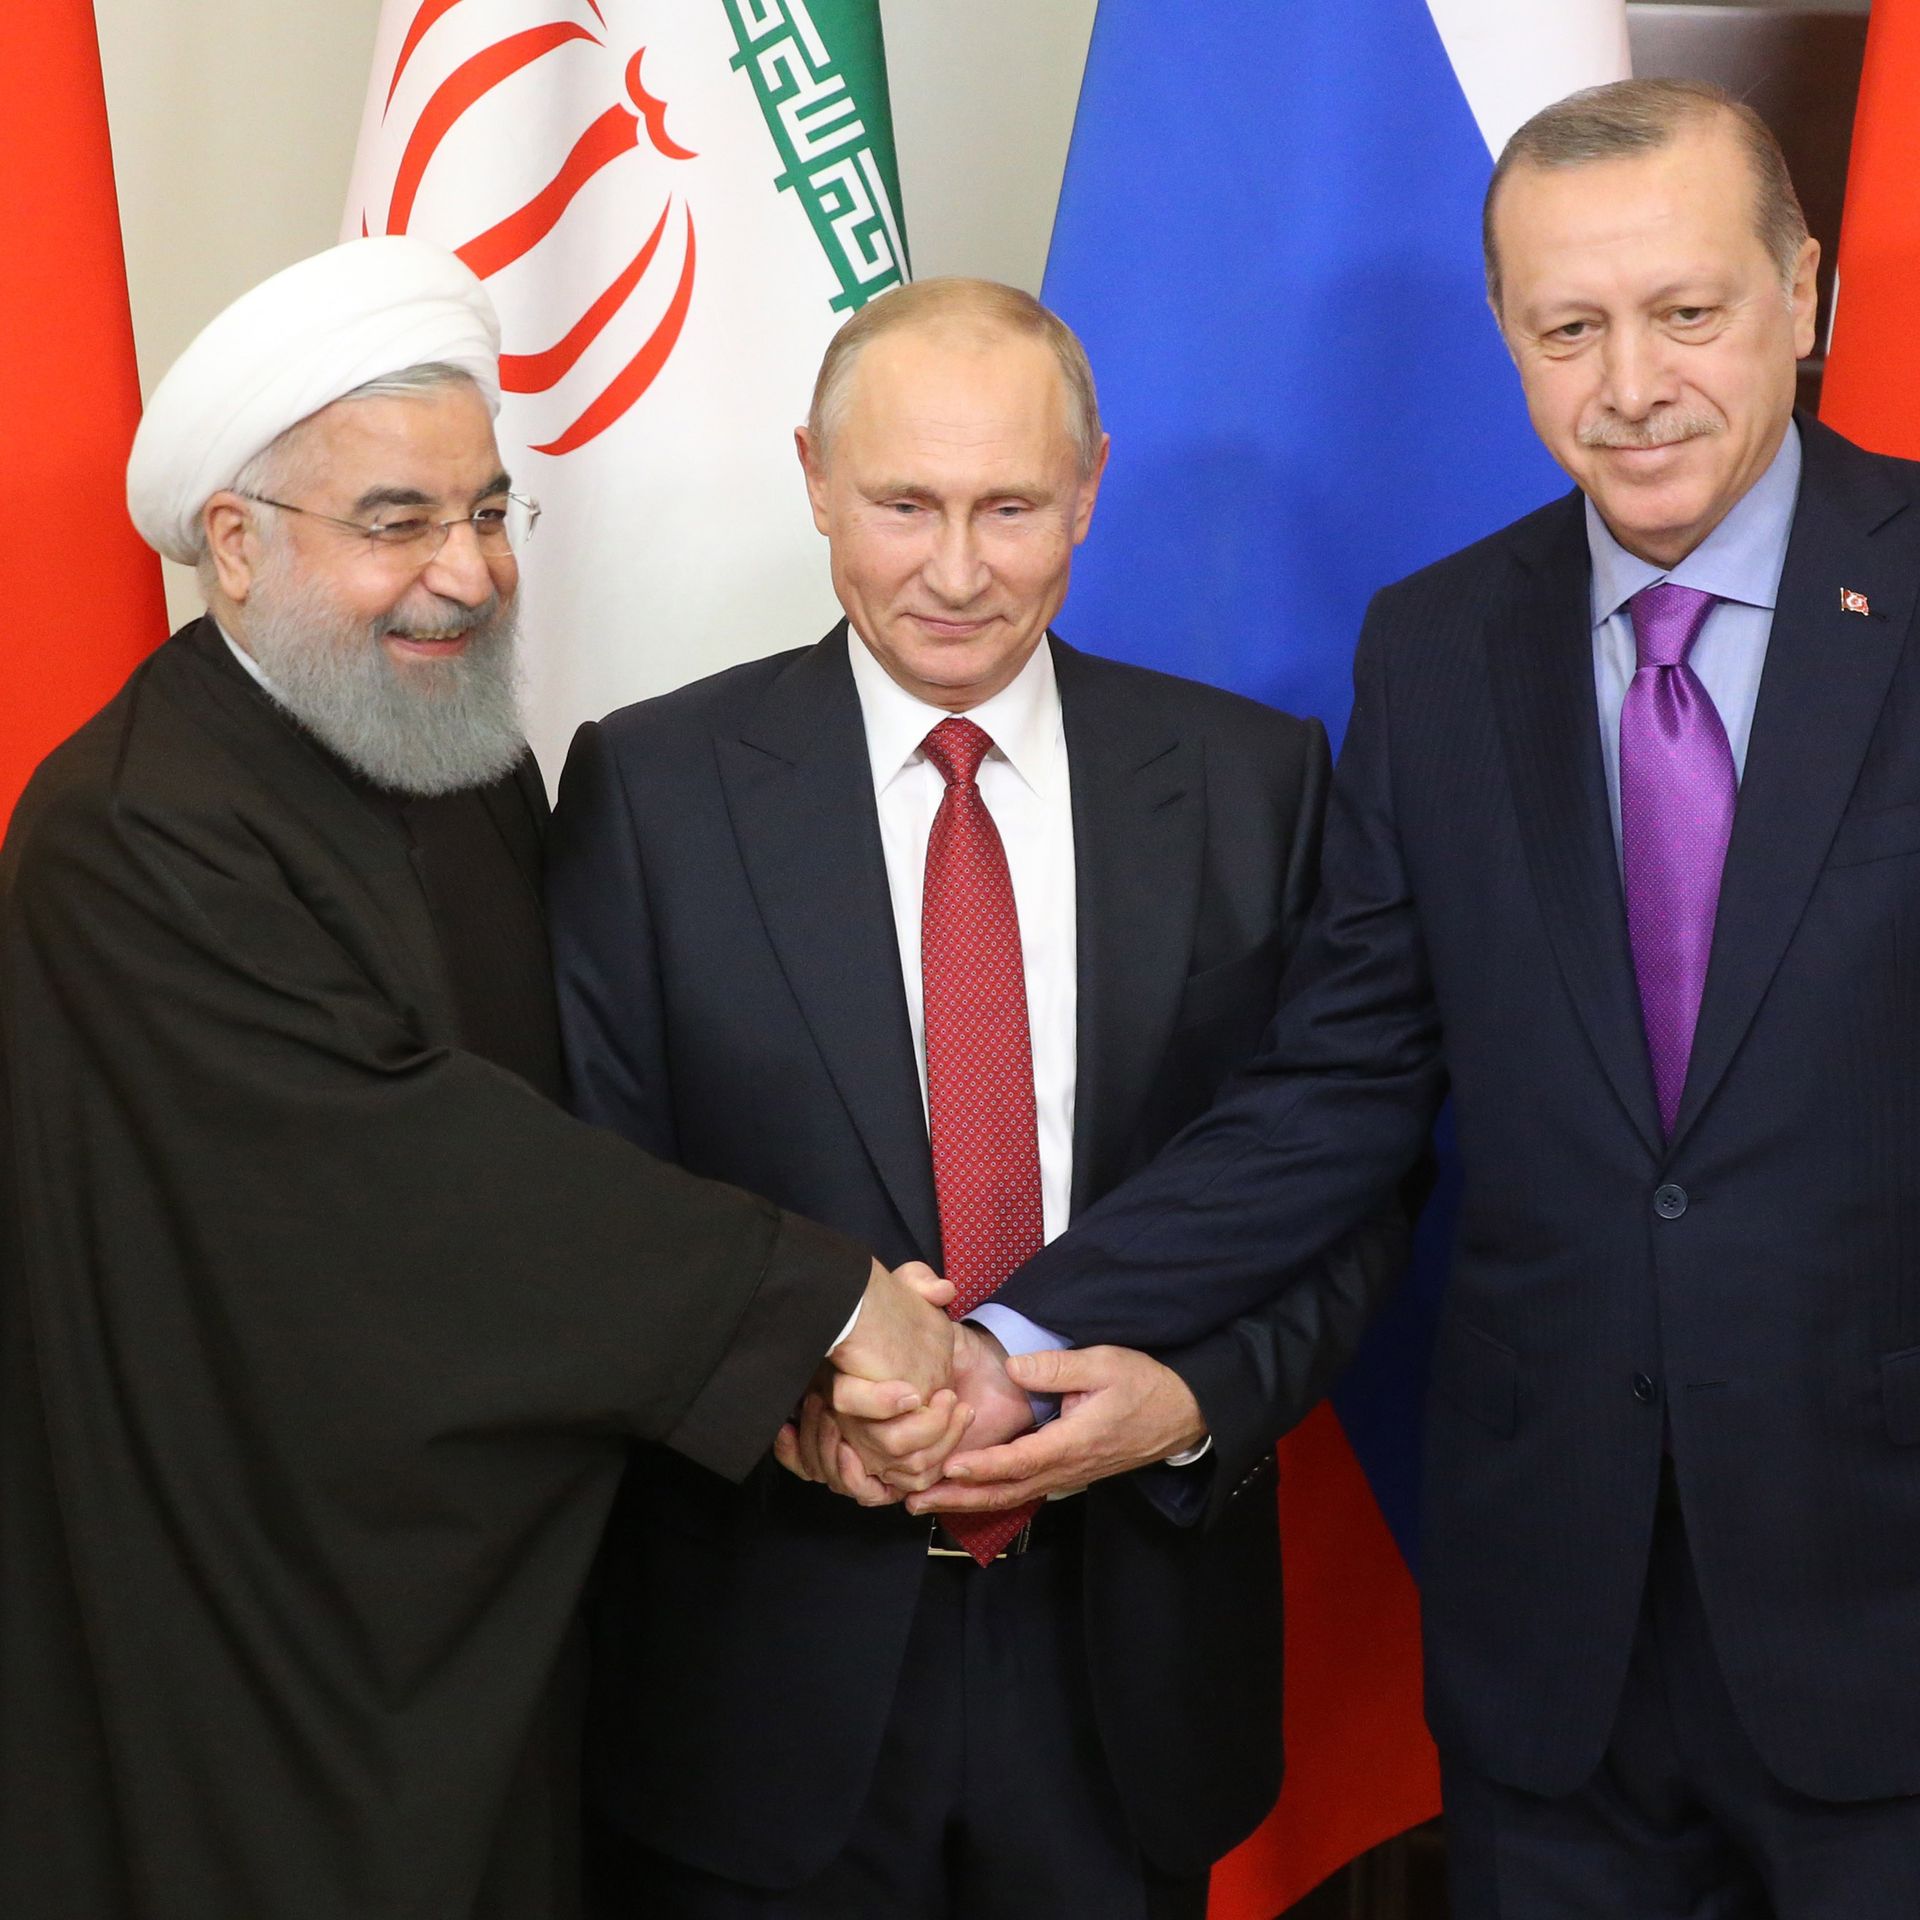 Russian President Vladimir Putin pose for a photo with Turkish President Recep Tayyip Erdogan and Iranian President Hassan Rouhani prior to their talks at Black Sea resort state residence